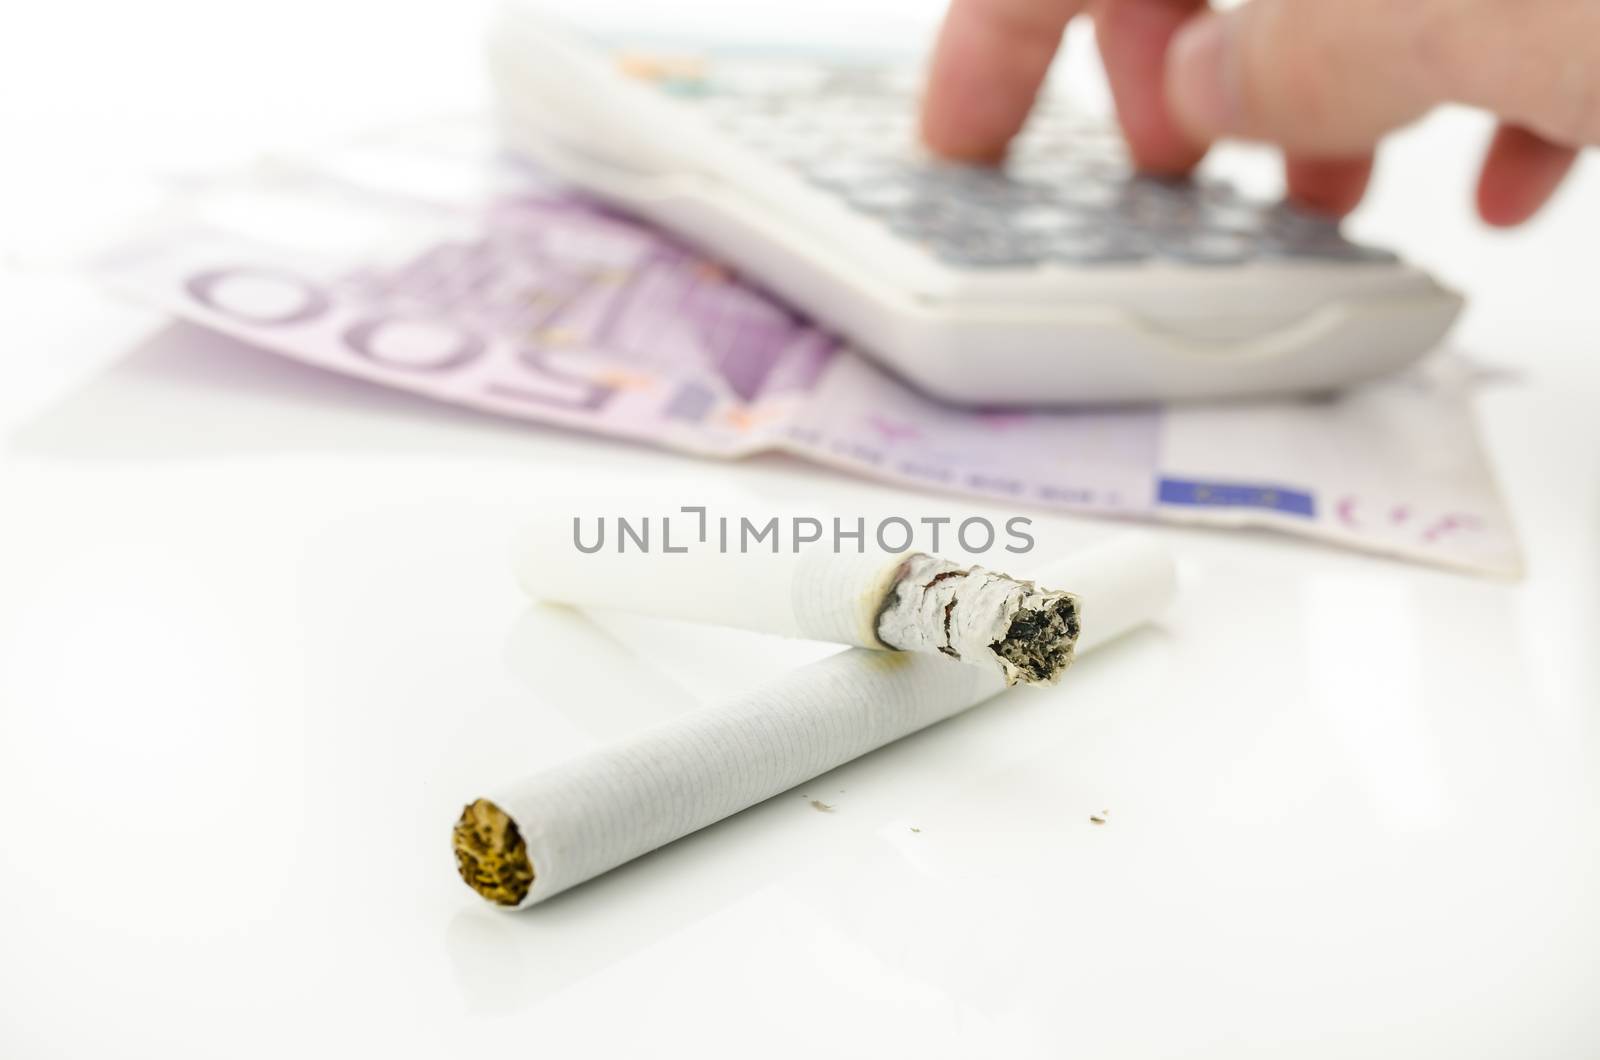 Half burned cigarette with male hand calculating costs of smoking addiction.